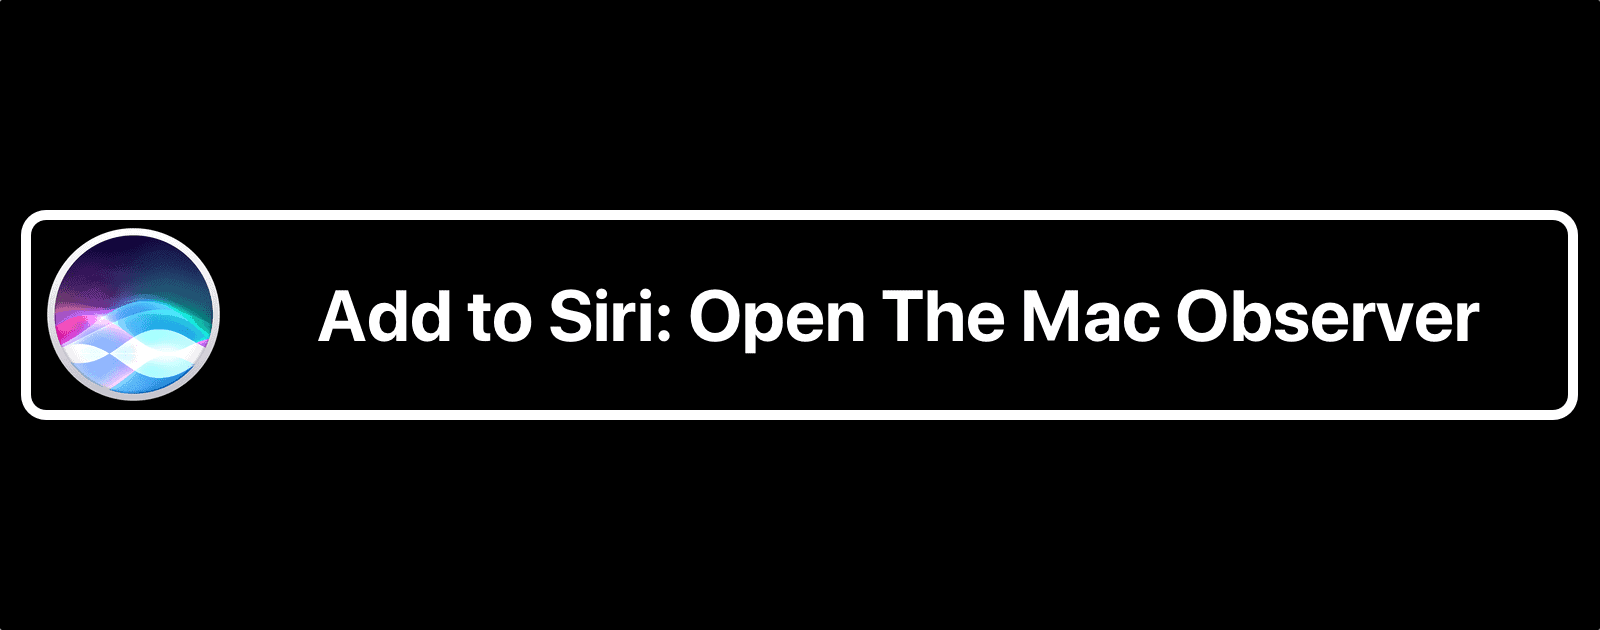 iOS 12 Siri Will Get Smarter Thanks to Shortcuts